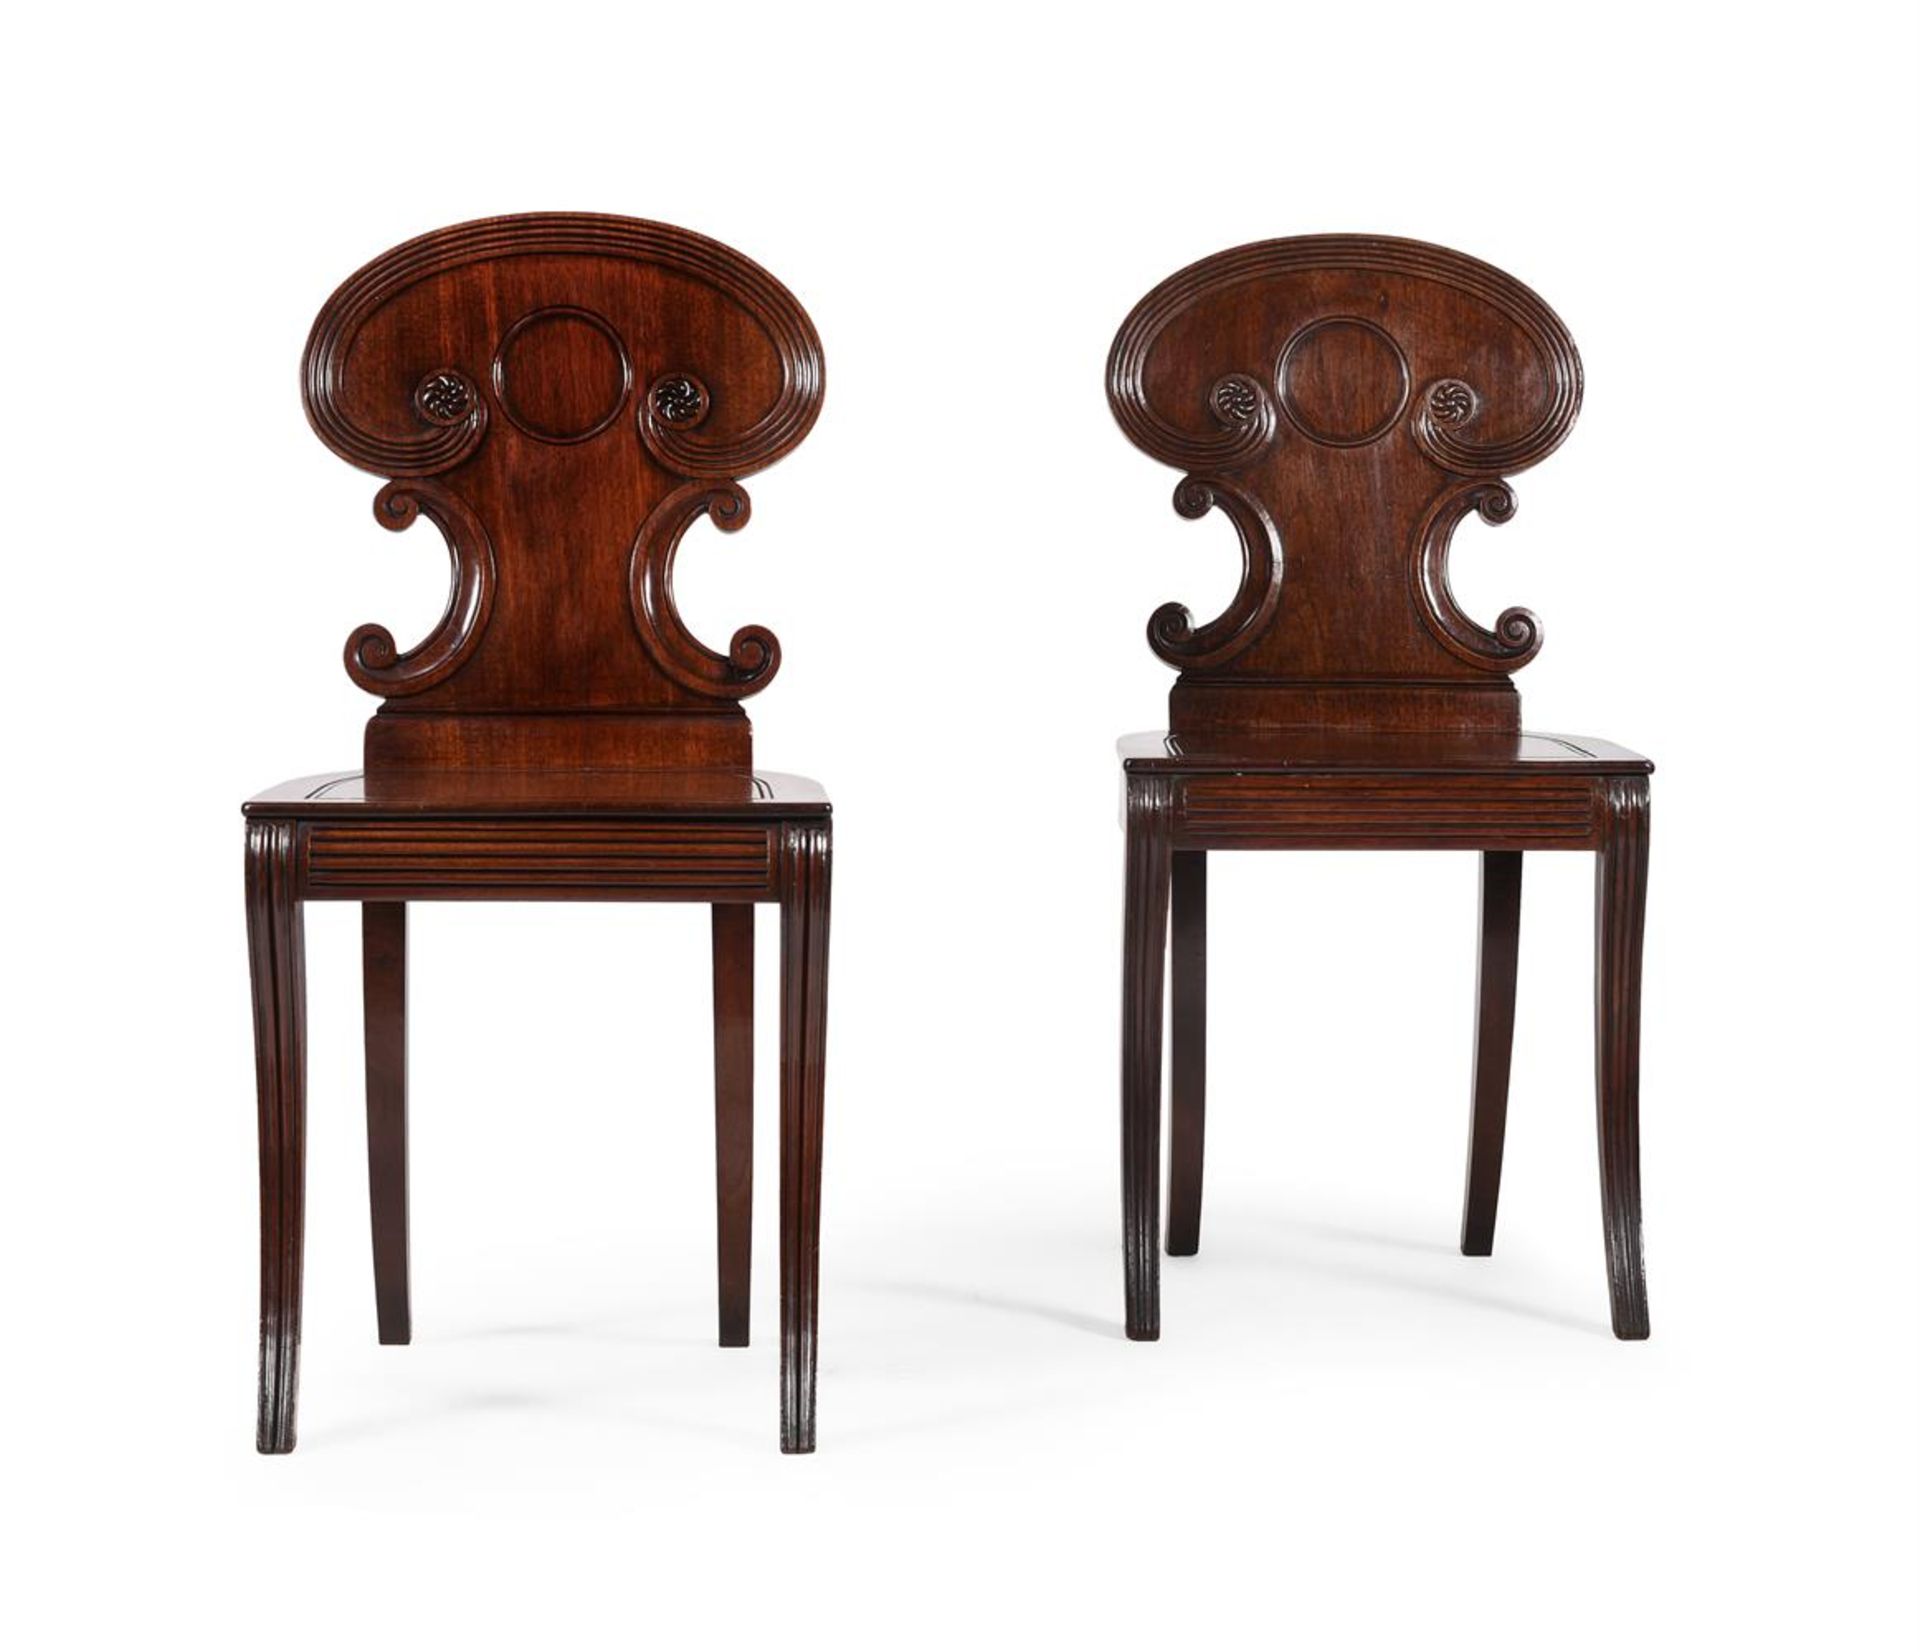 A PAIR OF REGENCY MAHOGANY HALL CHAIRS, ATTRIBUTED TO GILLOWS, CIRCA 1815